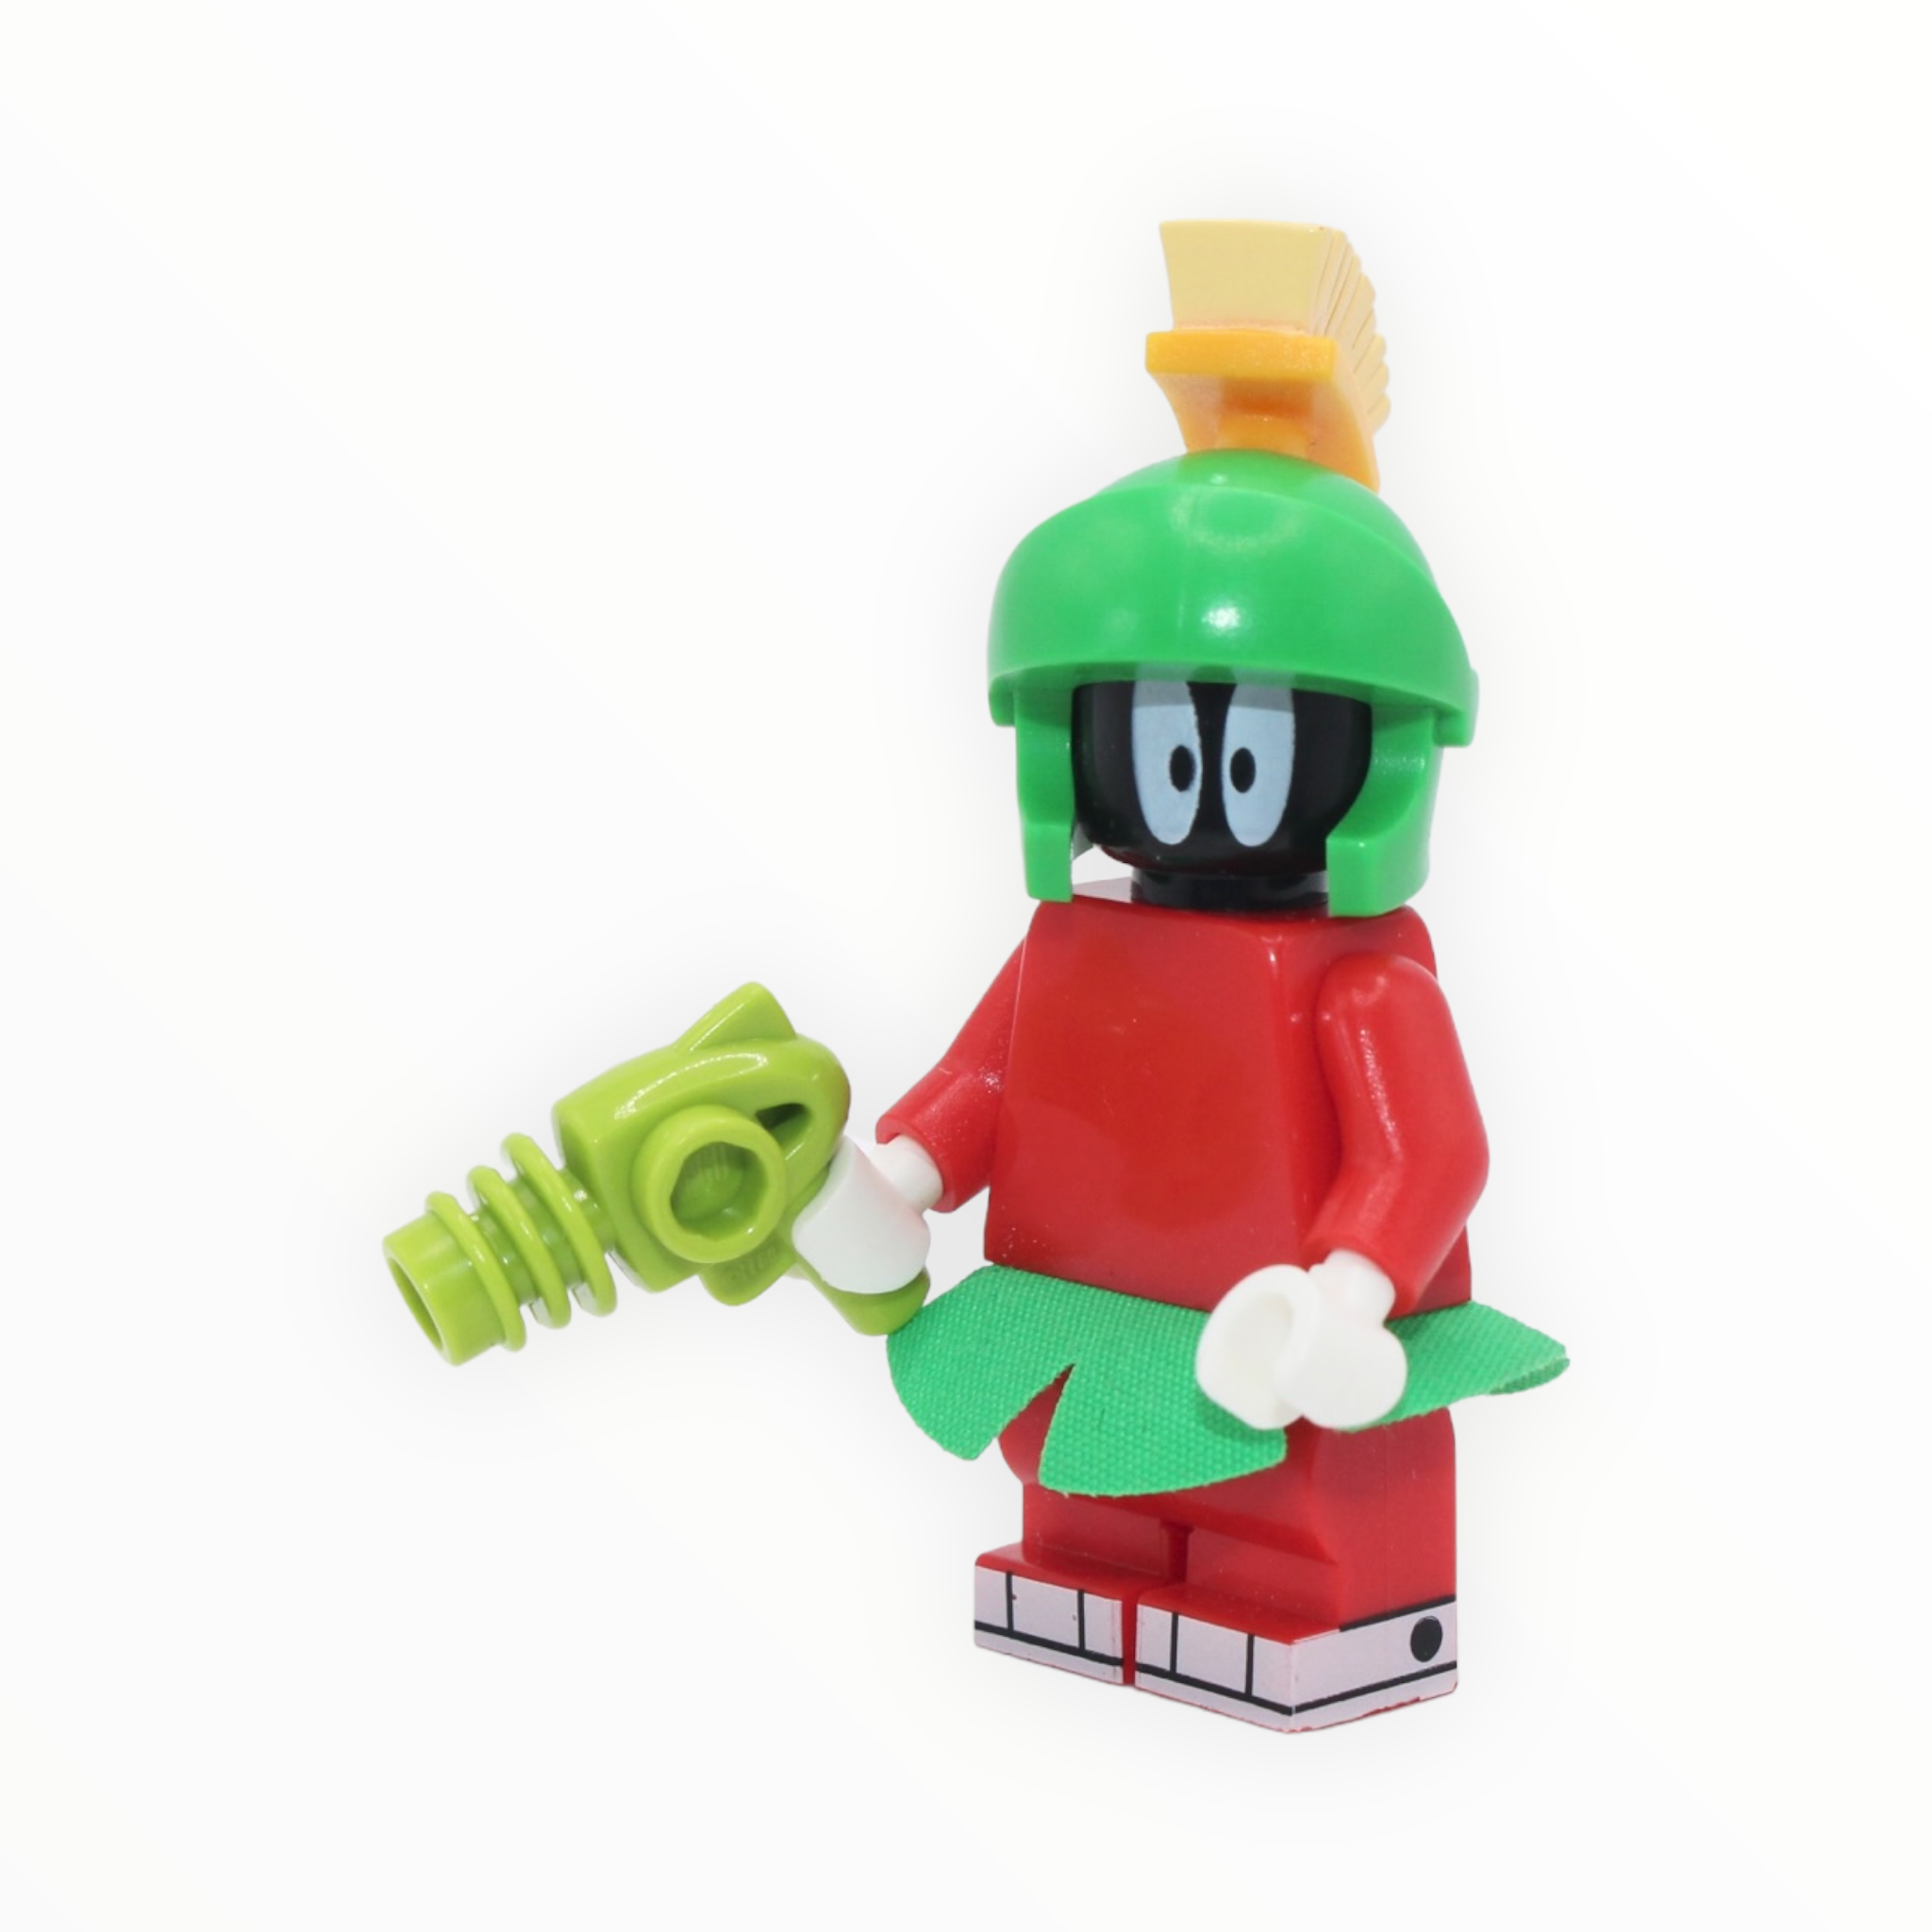 Looney Tunes Series: Marvin the Martian